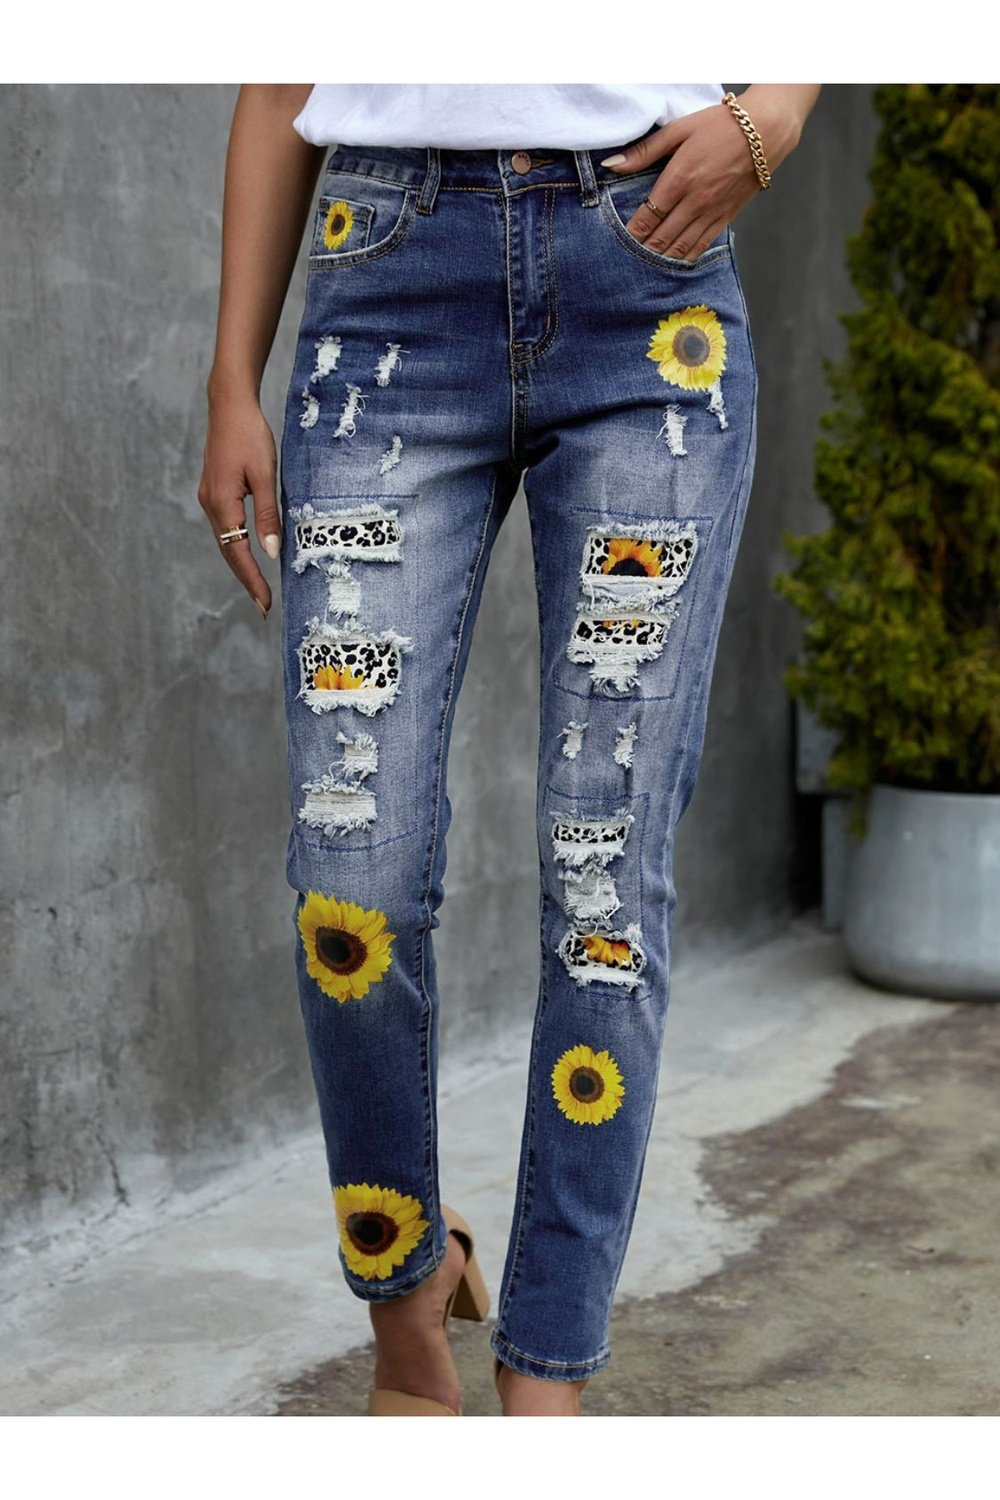 Leopard Patchwork Sunflower Print Distressed High Waist Jeans - Jeans - FITGGINS